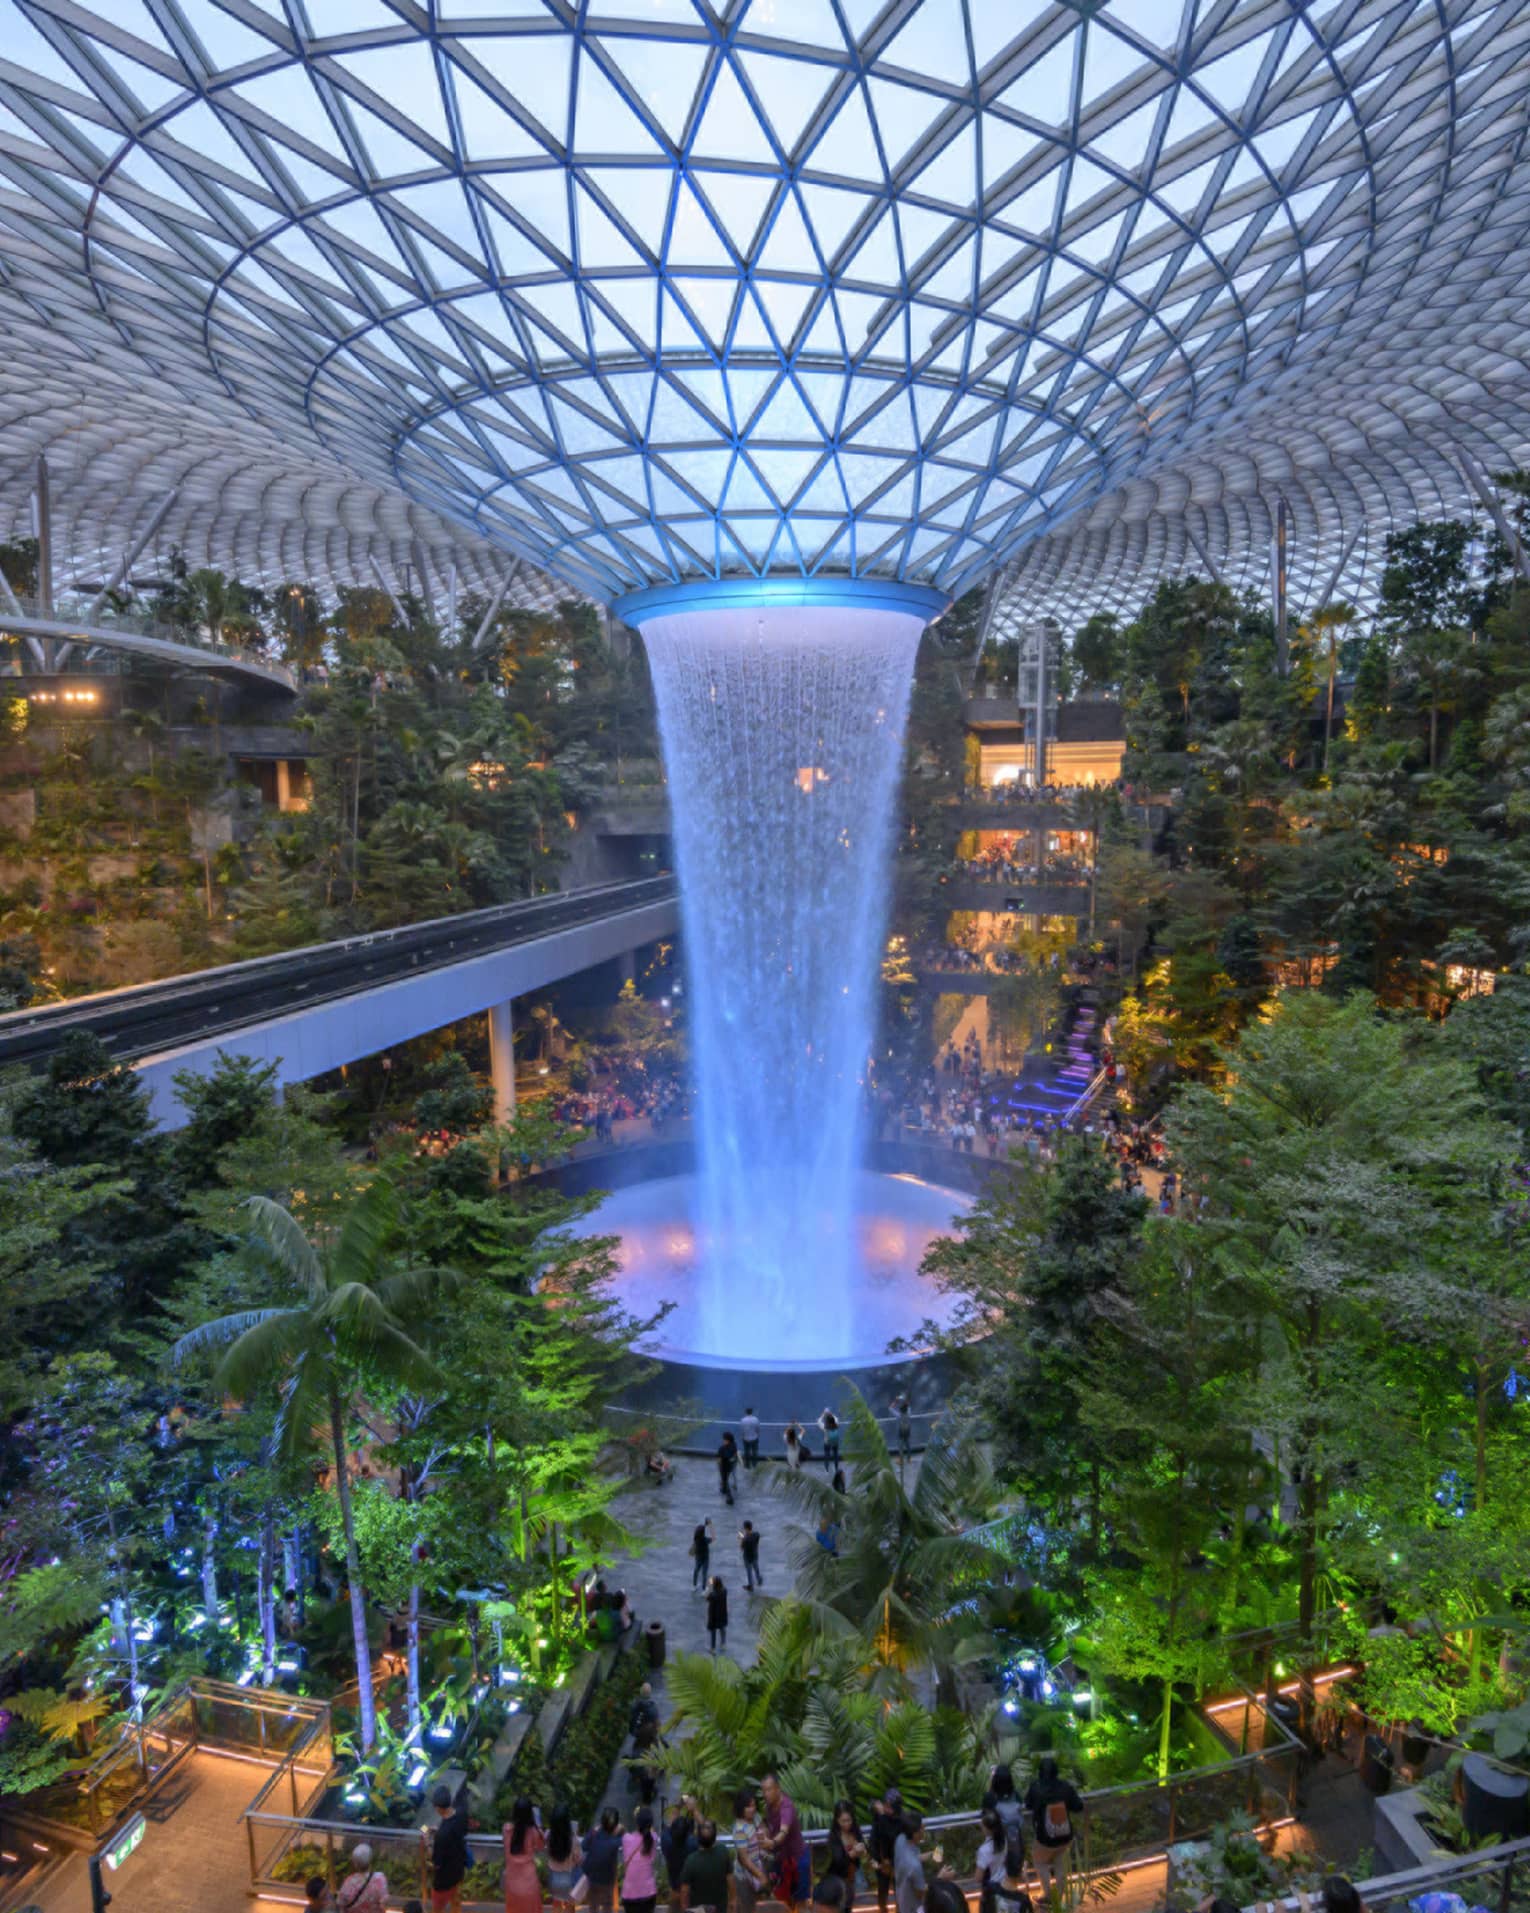 An arial view of an indoor garden with a large fountain in the center in singapore